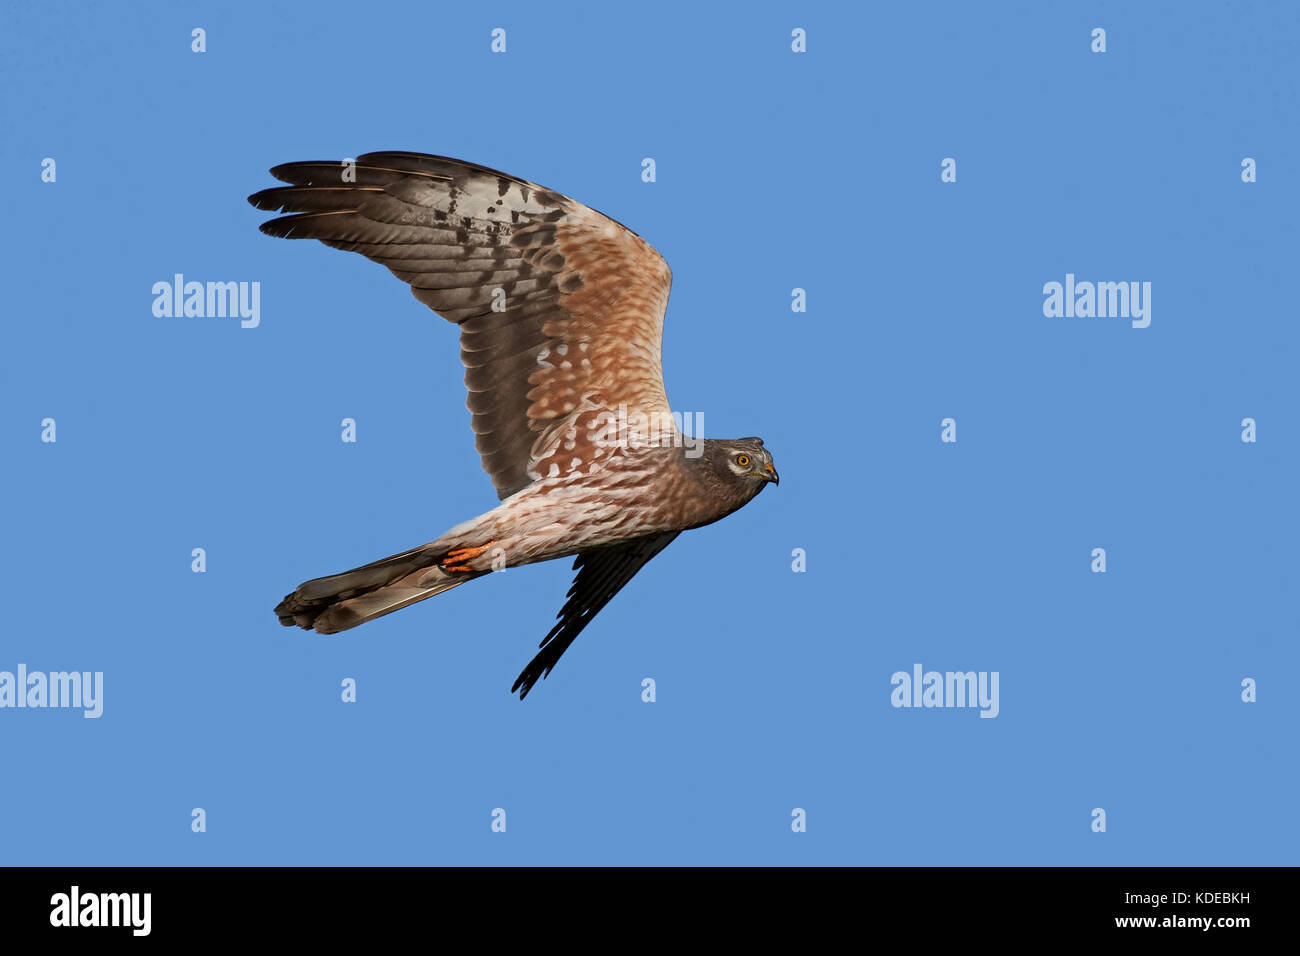 Montagus harrier in flight with blue skies in the background Stock Photo